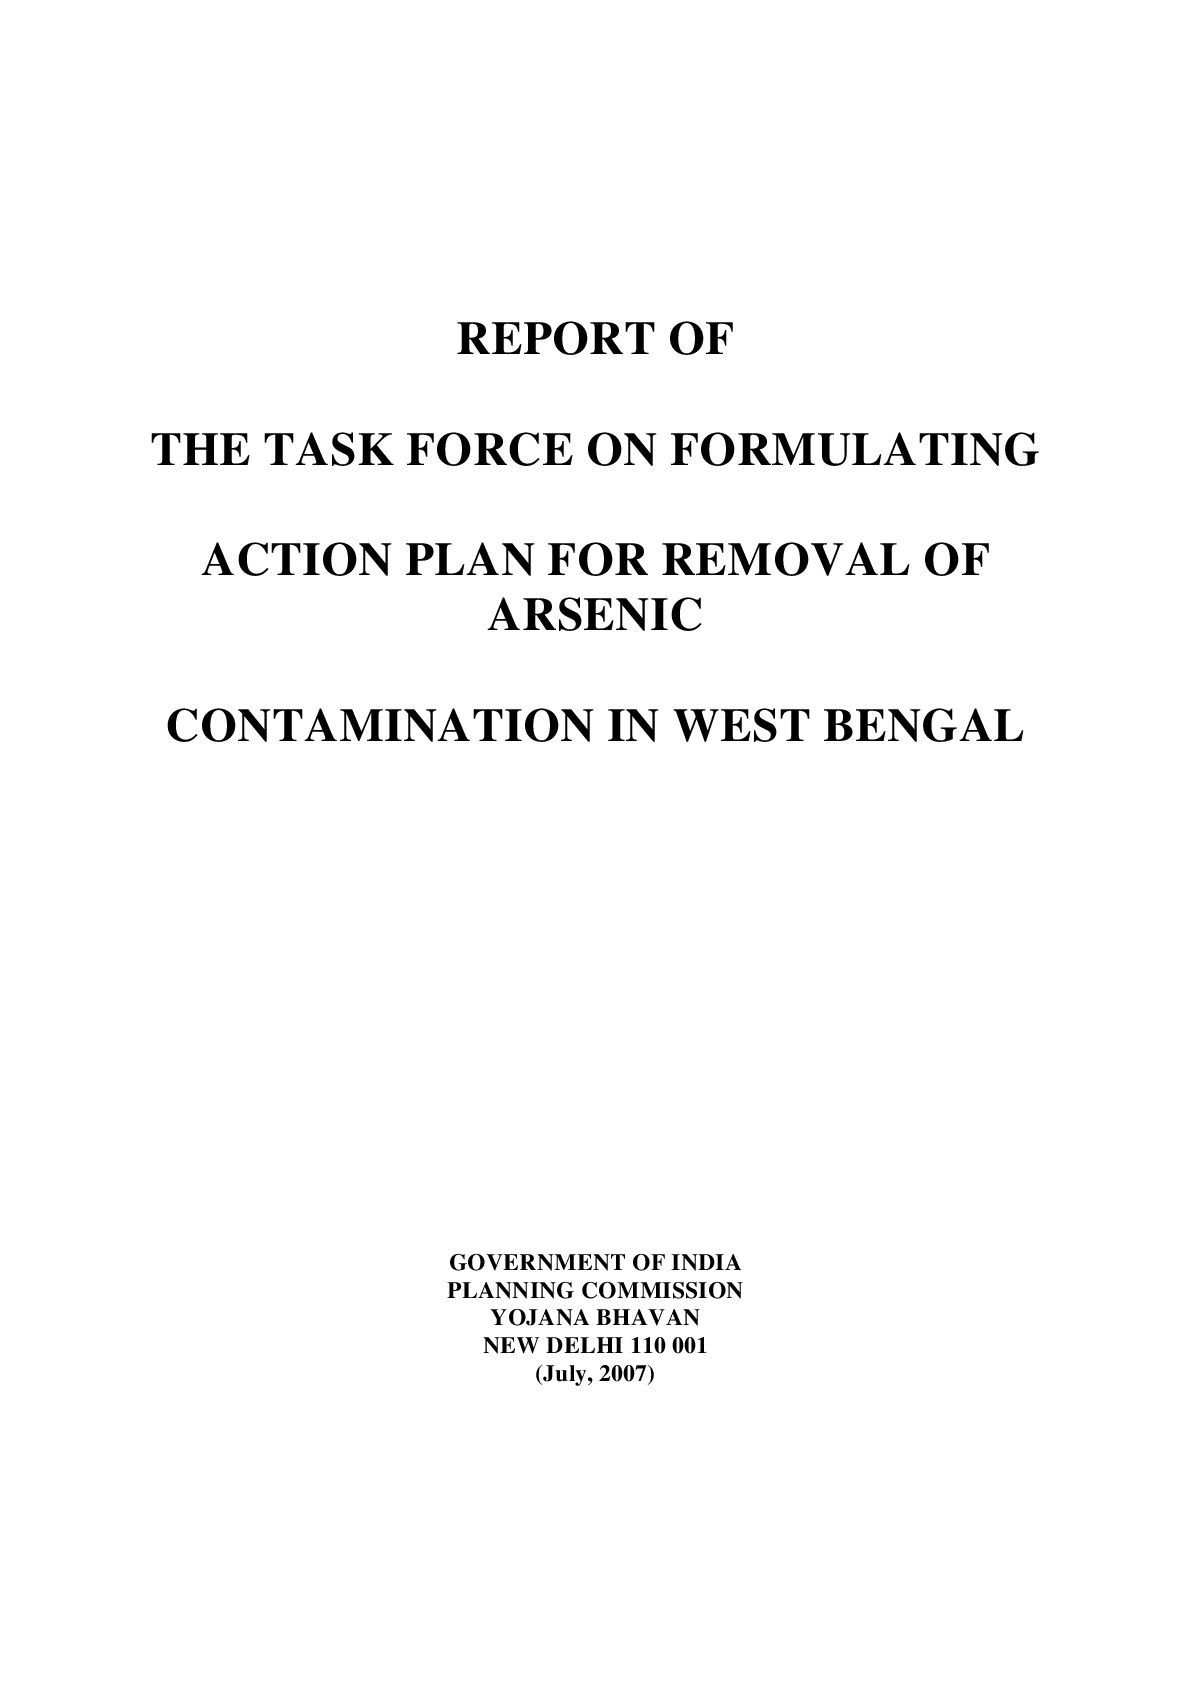 Report of The Task Force on Formulating Action Plan for Removal of Arsenic Contamination